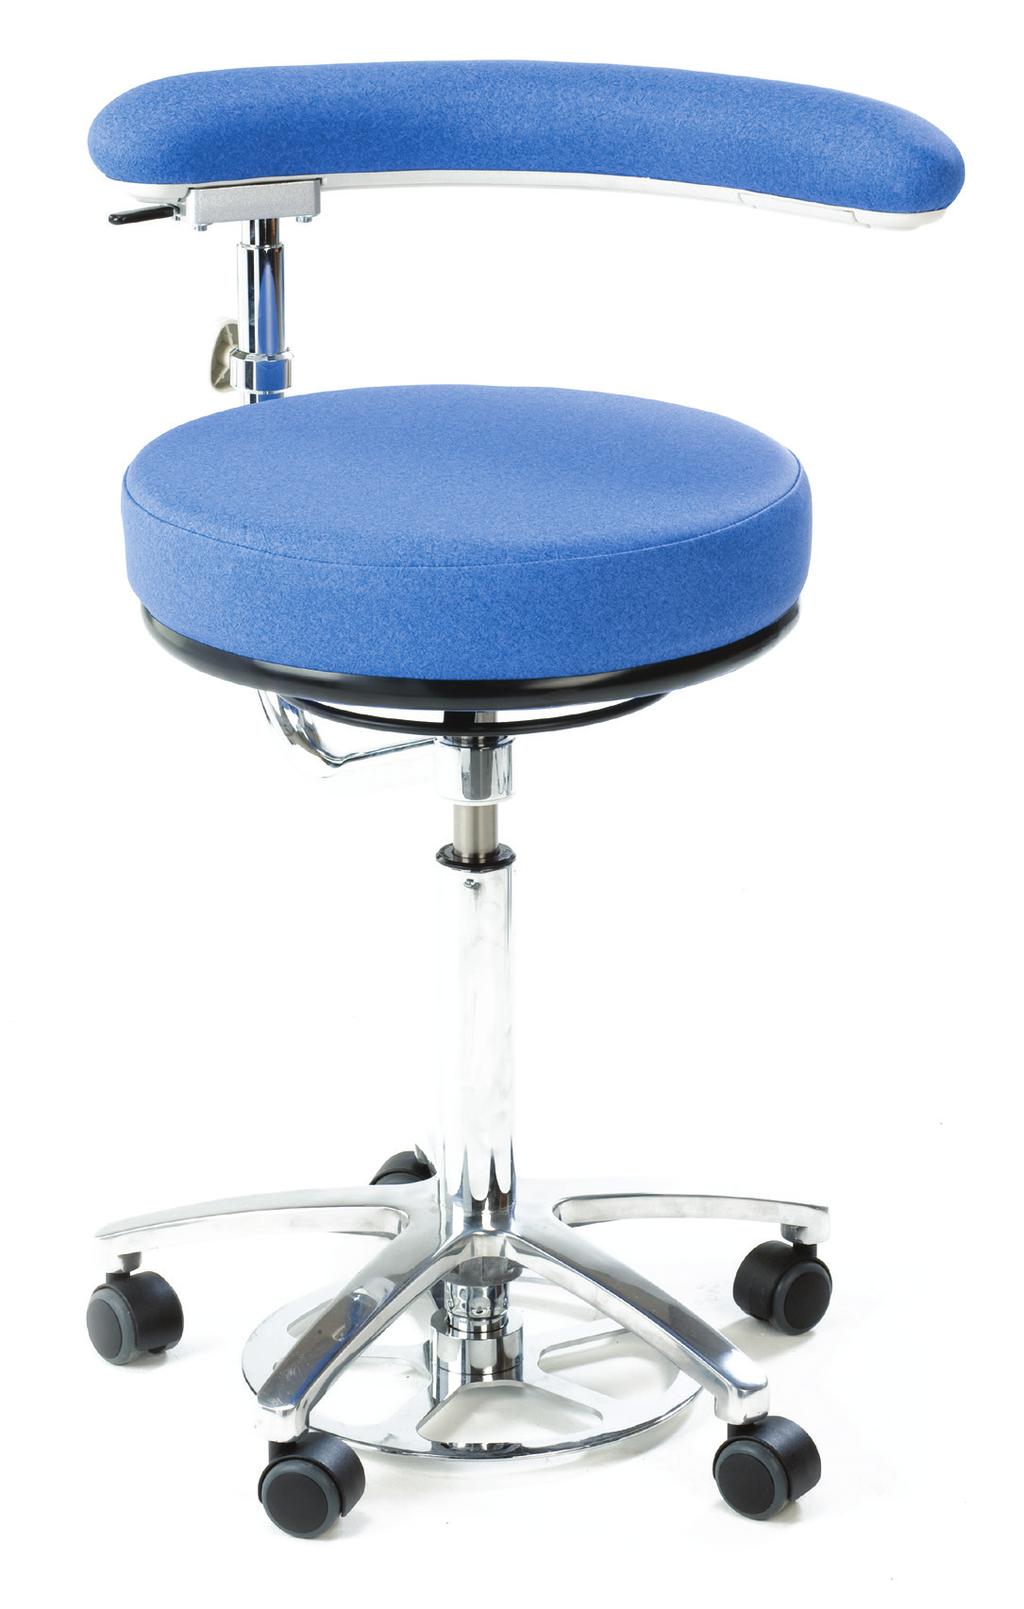 MEDIC Multi Procedures Chair 150Kg Ideally suited for Operating Suites, Ultrasound, Dentistry and Ophthalmic Departments.